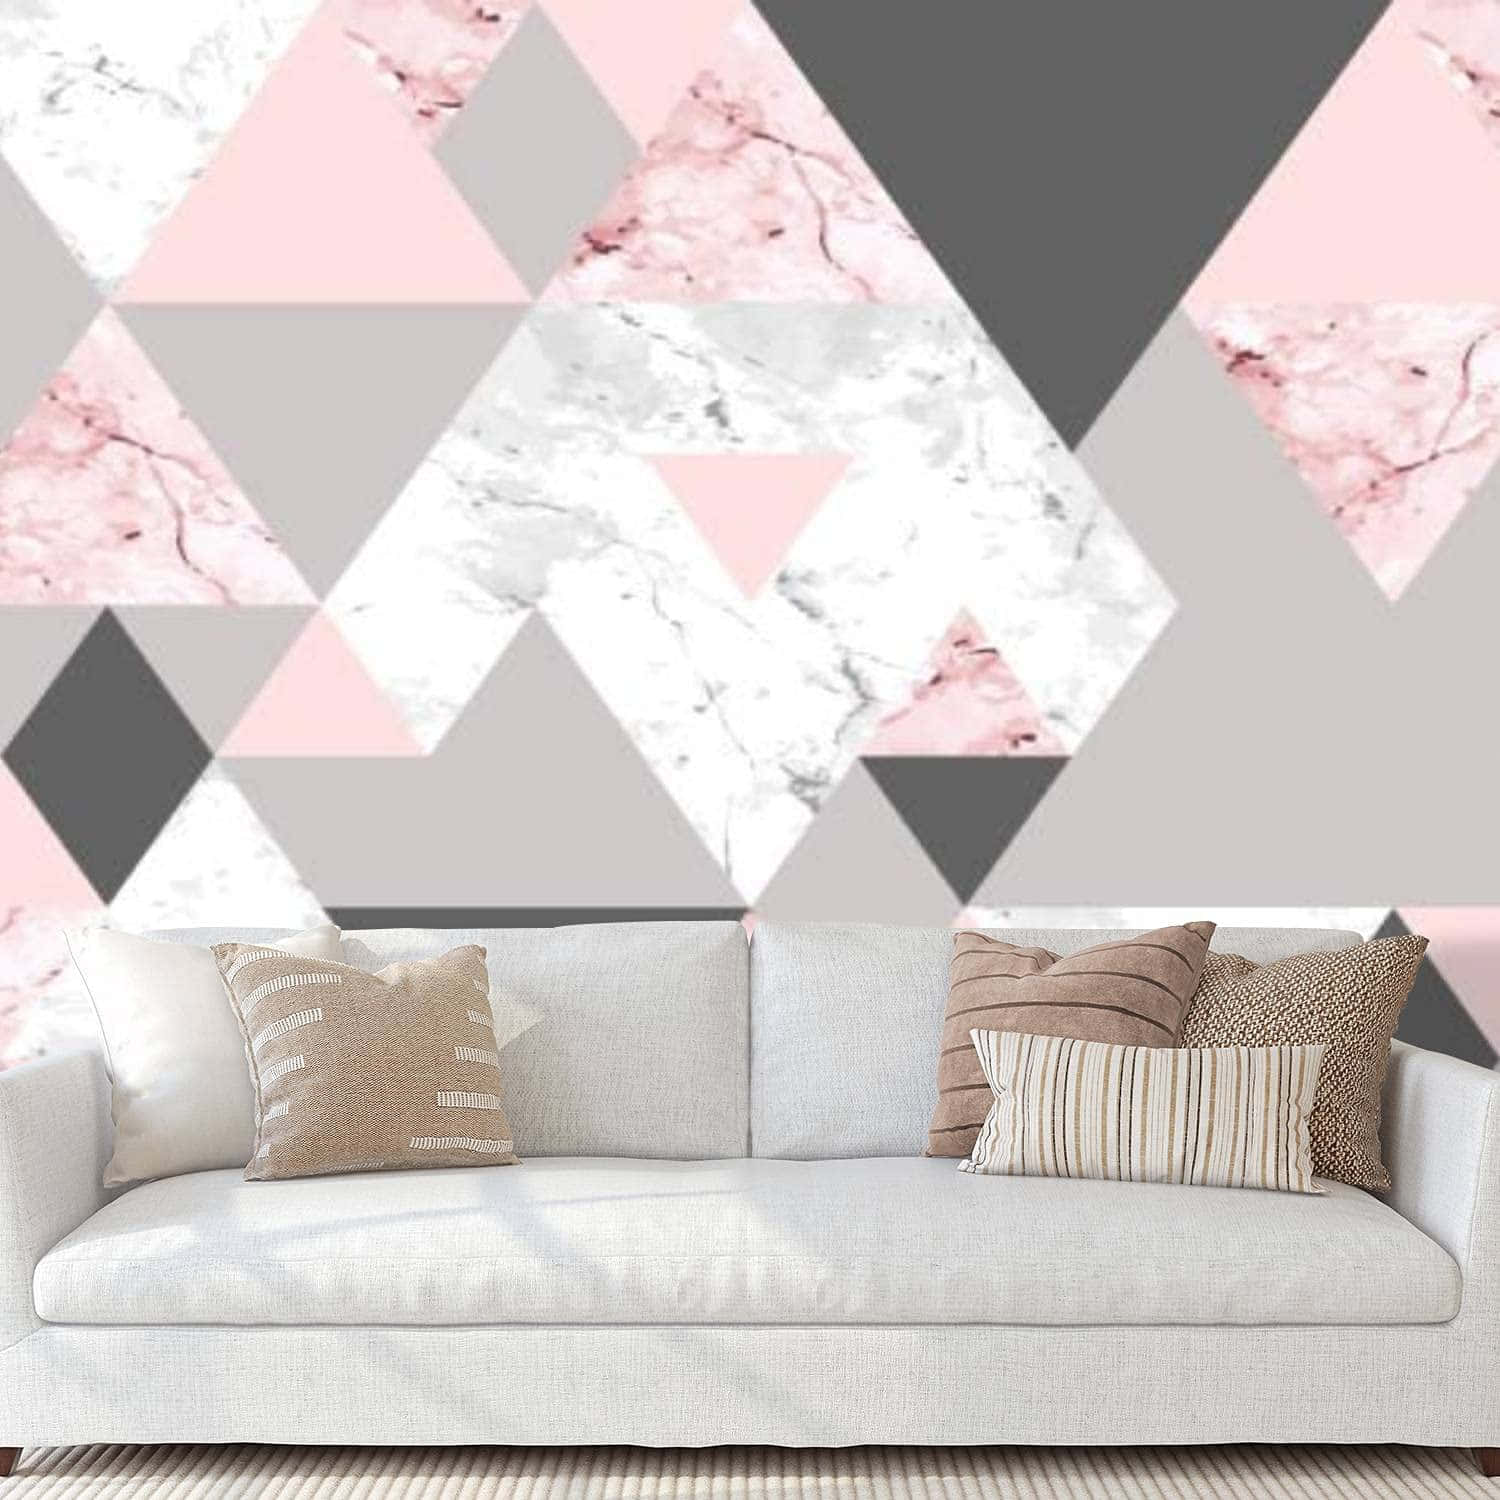 A beautiful blend of gentle grey and vibrant pink Wallpaper